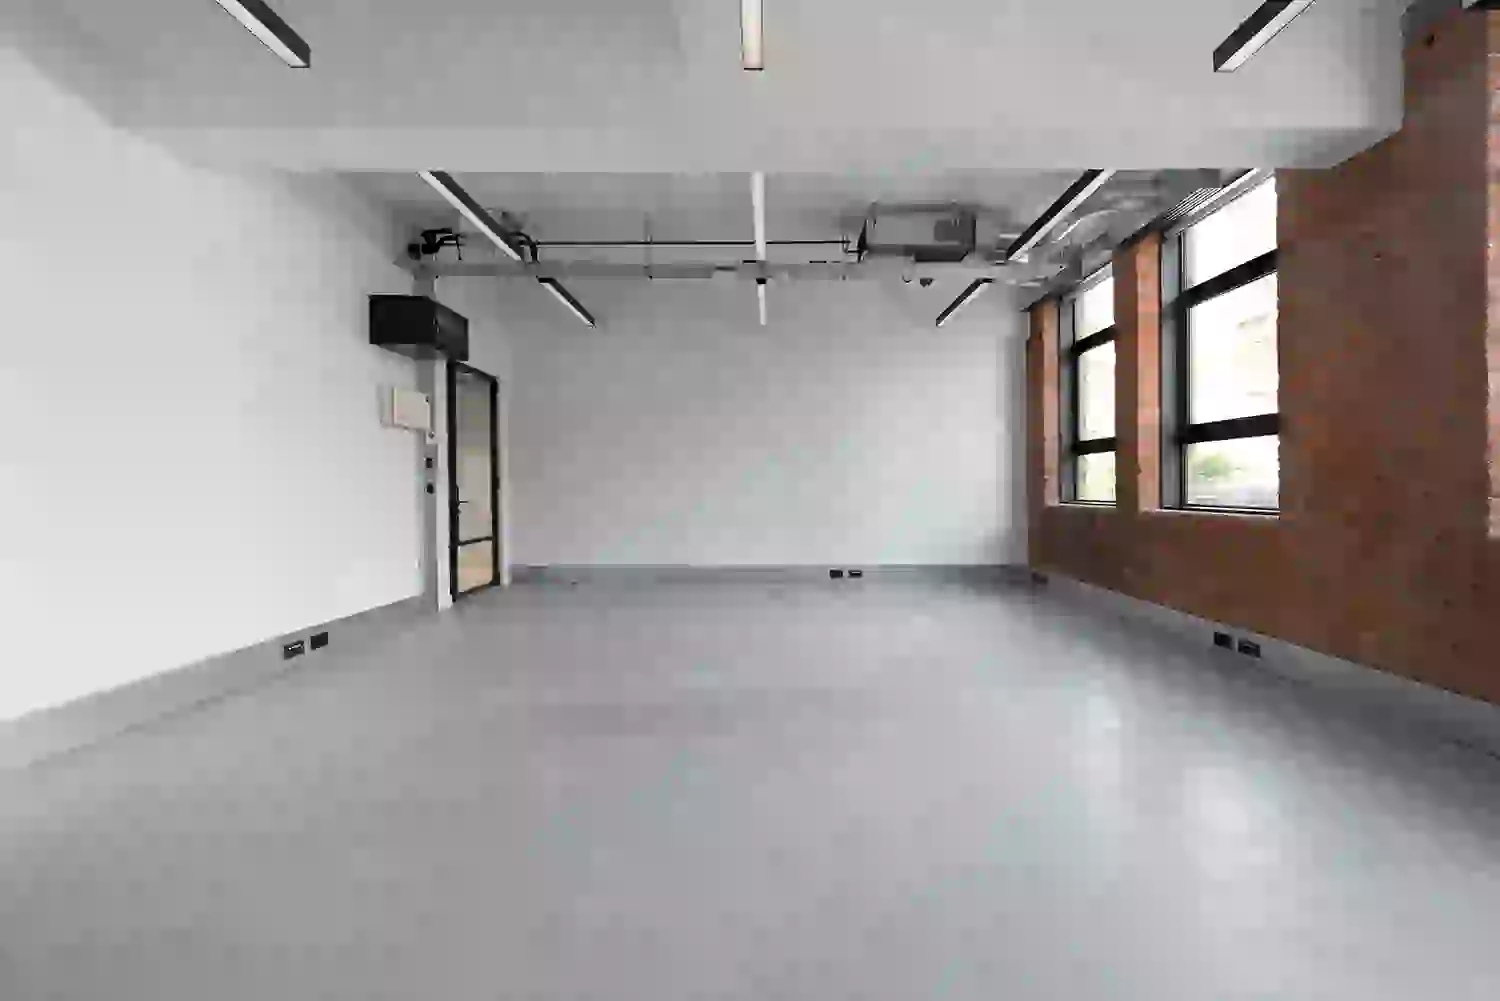 Office space to rent at Ink Rooms, 25-37 Easton Street, Clerkenwell, London, unit IR.1.01, 483 sq ft (44 sq m).